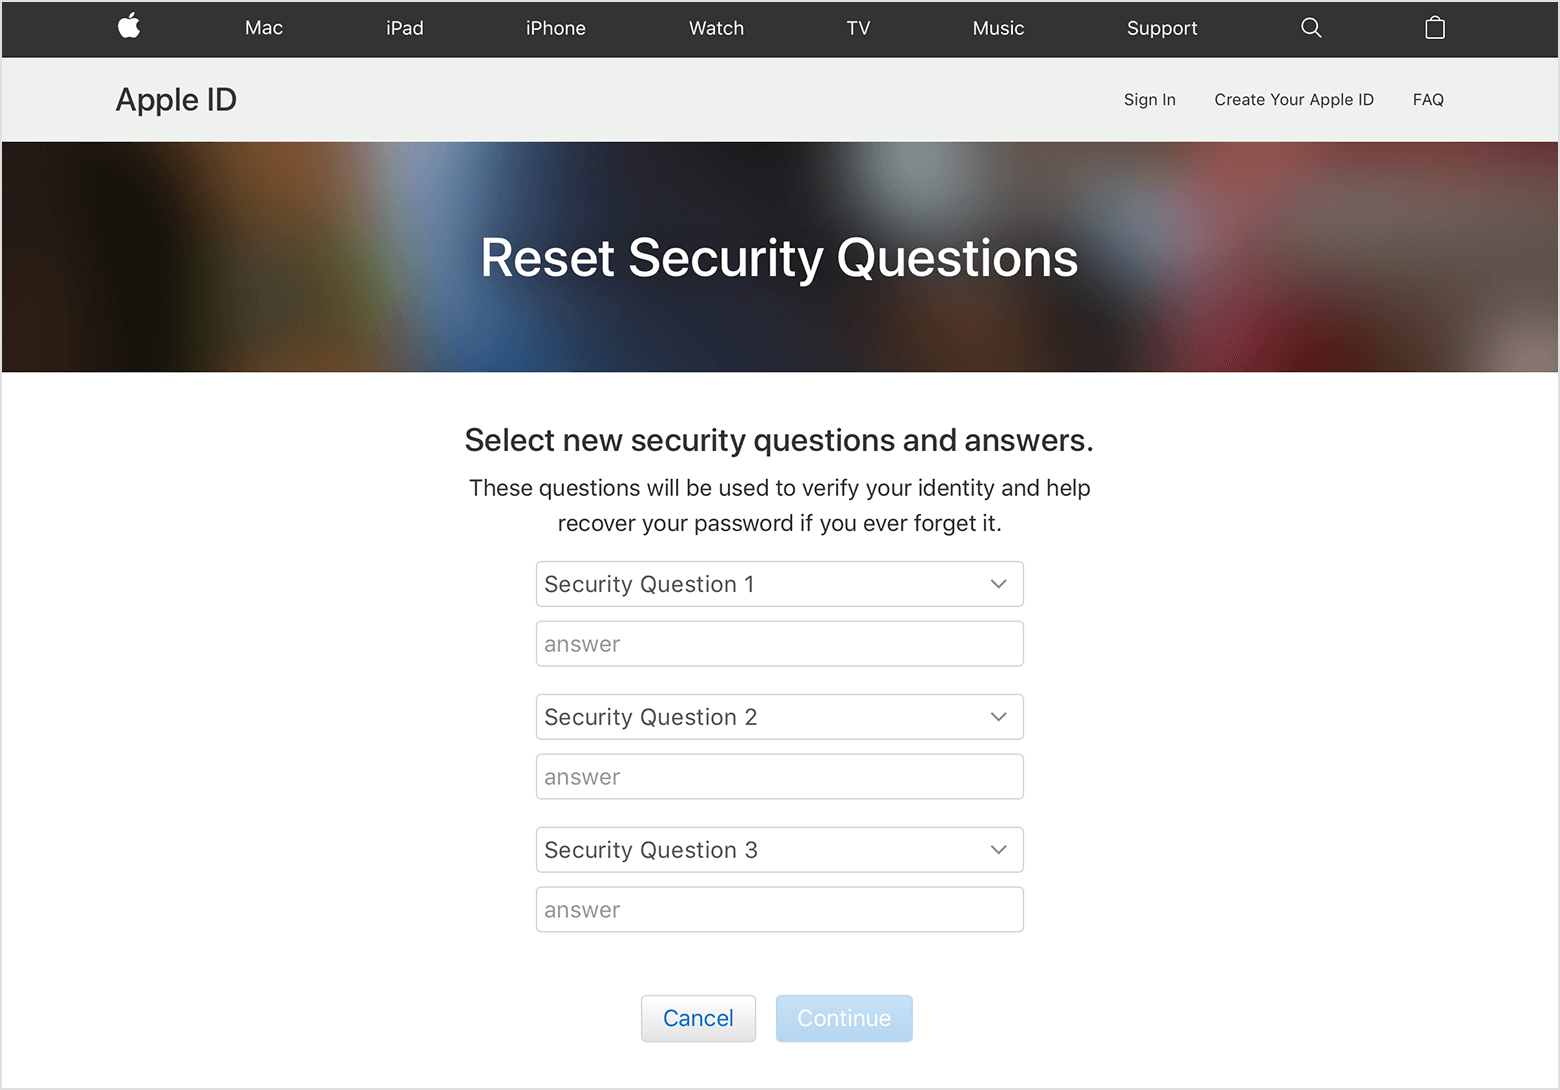 forgotten yahoo security answer